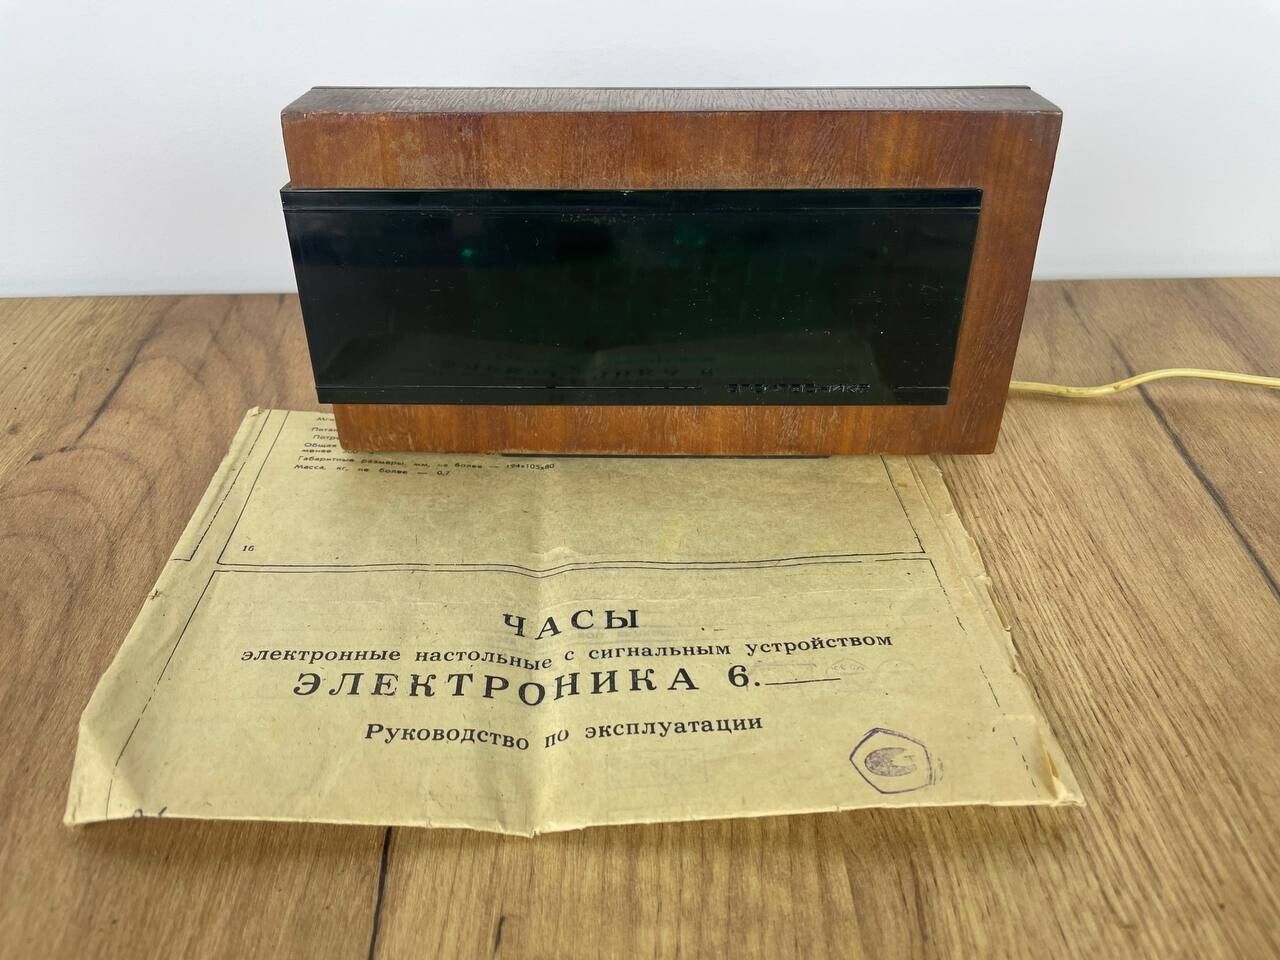 Vintage table electronic clock \